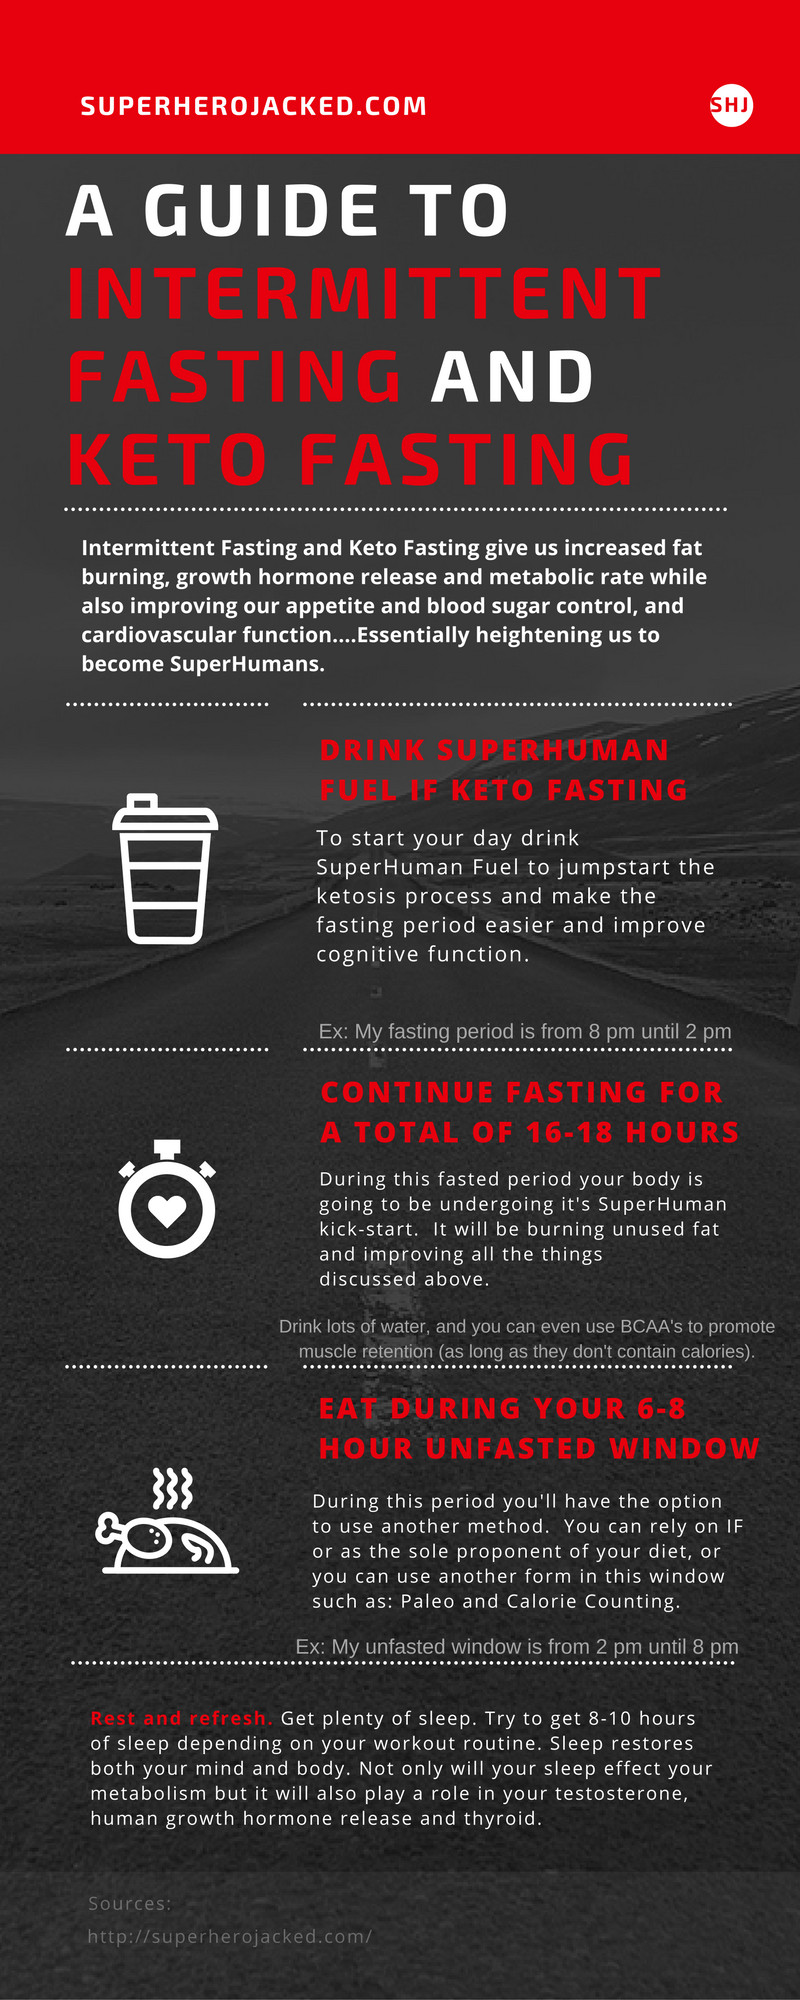 Intermittent Fasting Keto Diet
 A Guide to Intermittent Fasting and Keto Fasting [Infographic]